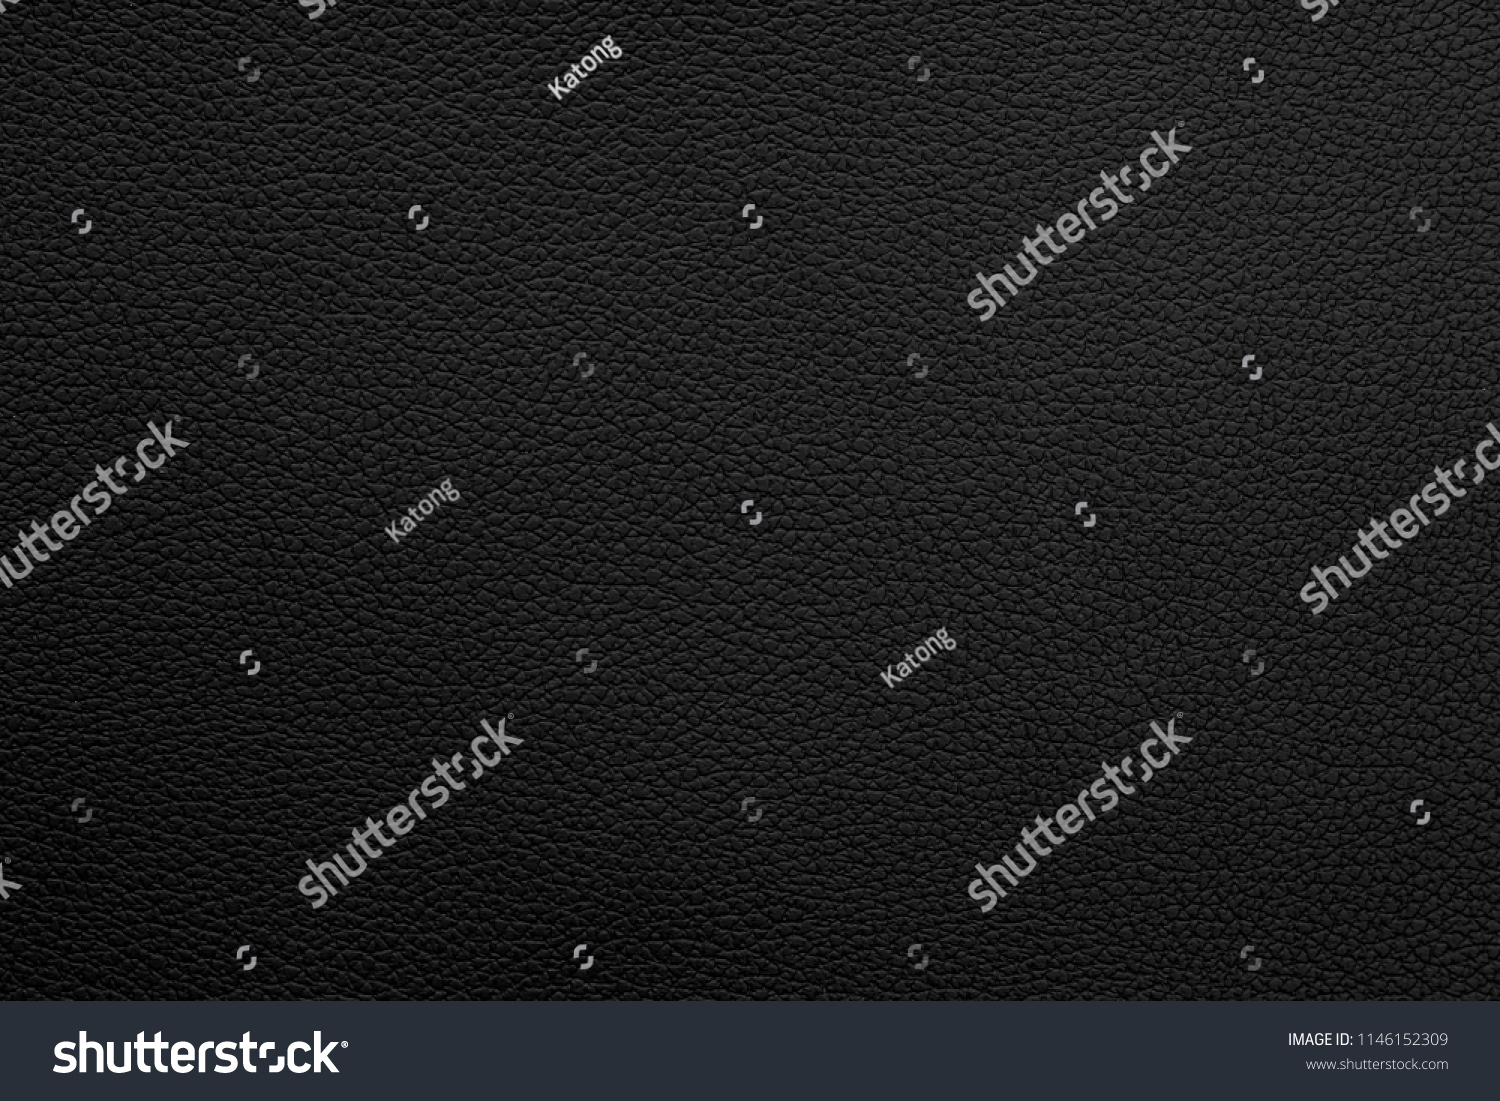 Black leather texture background. #1146152309